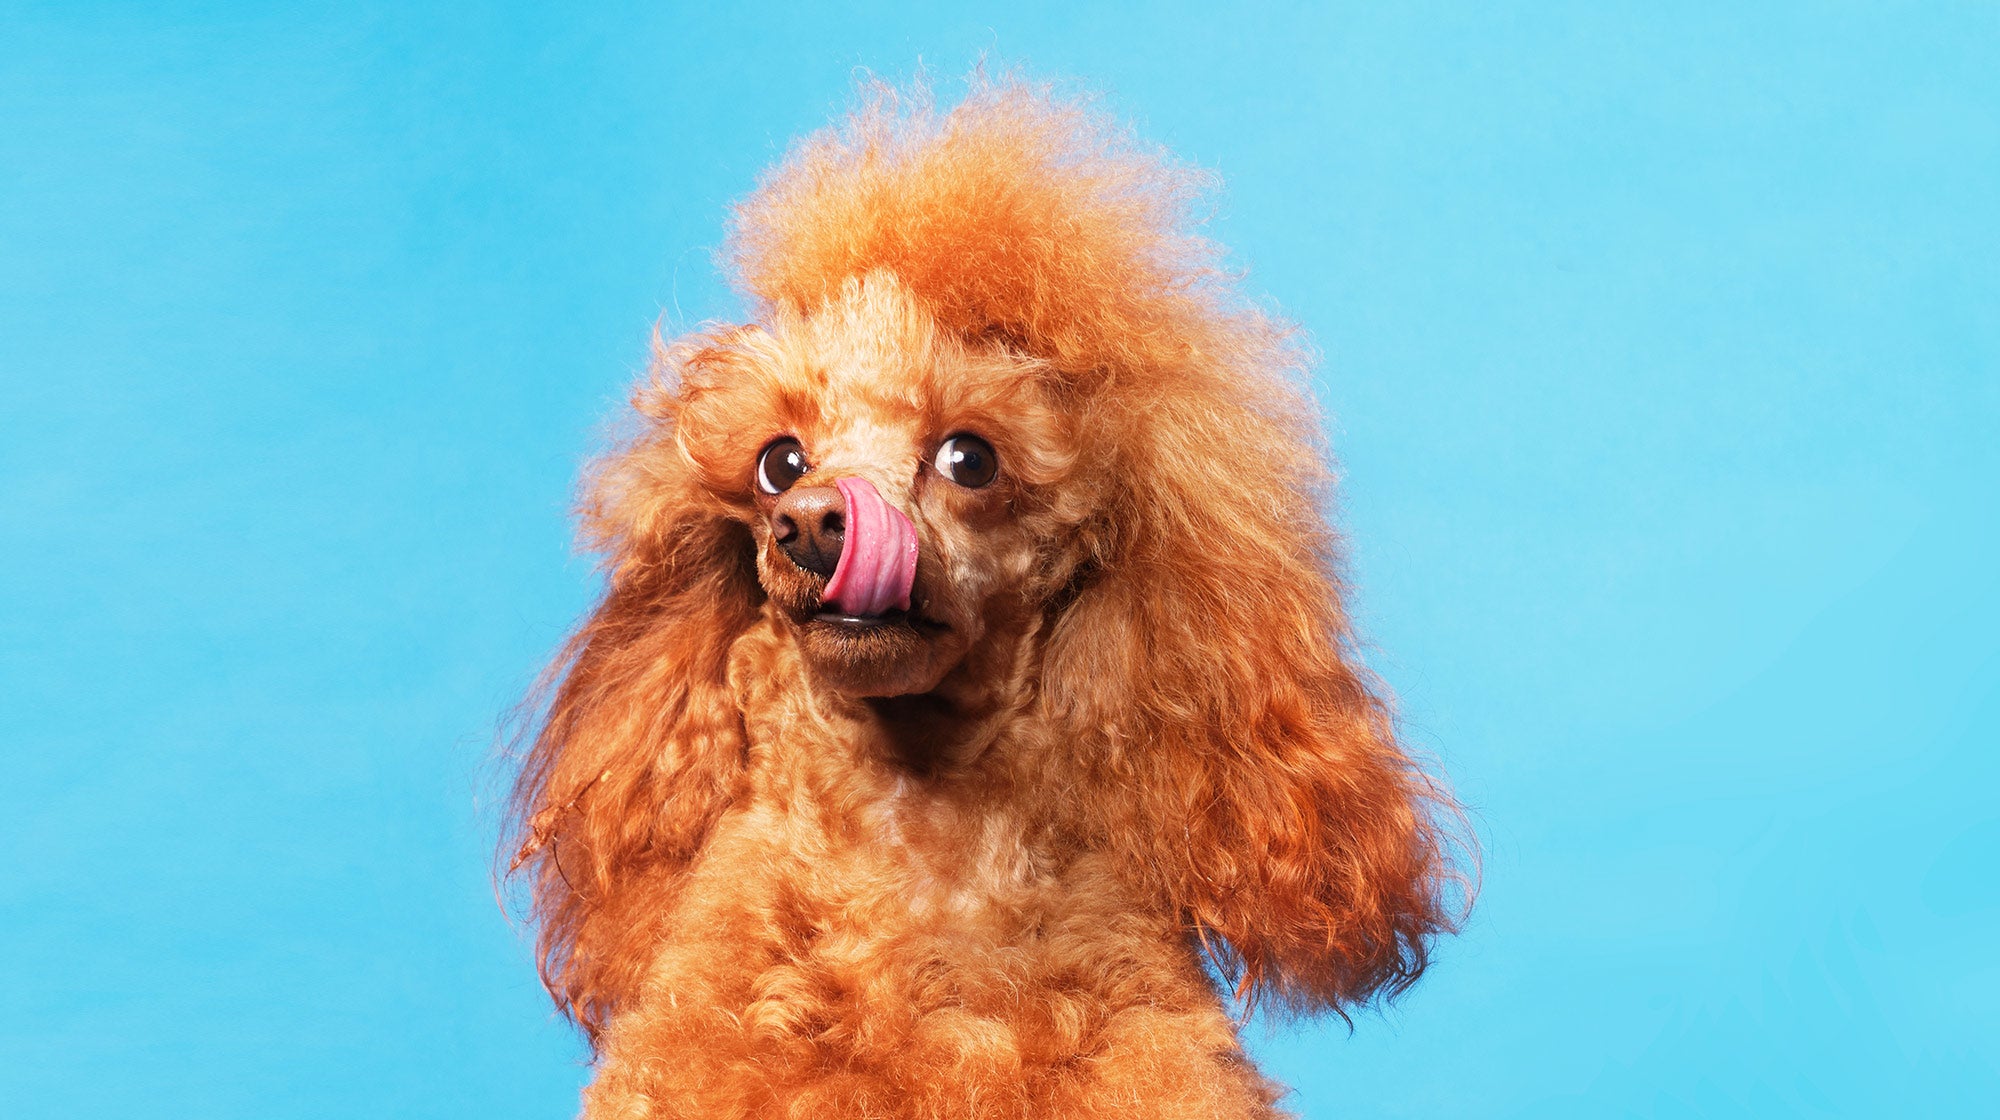 Toy Poodle Feeding Guide